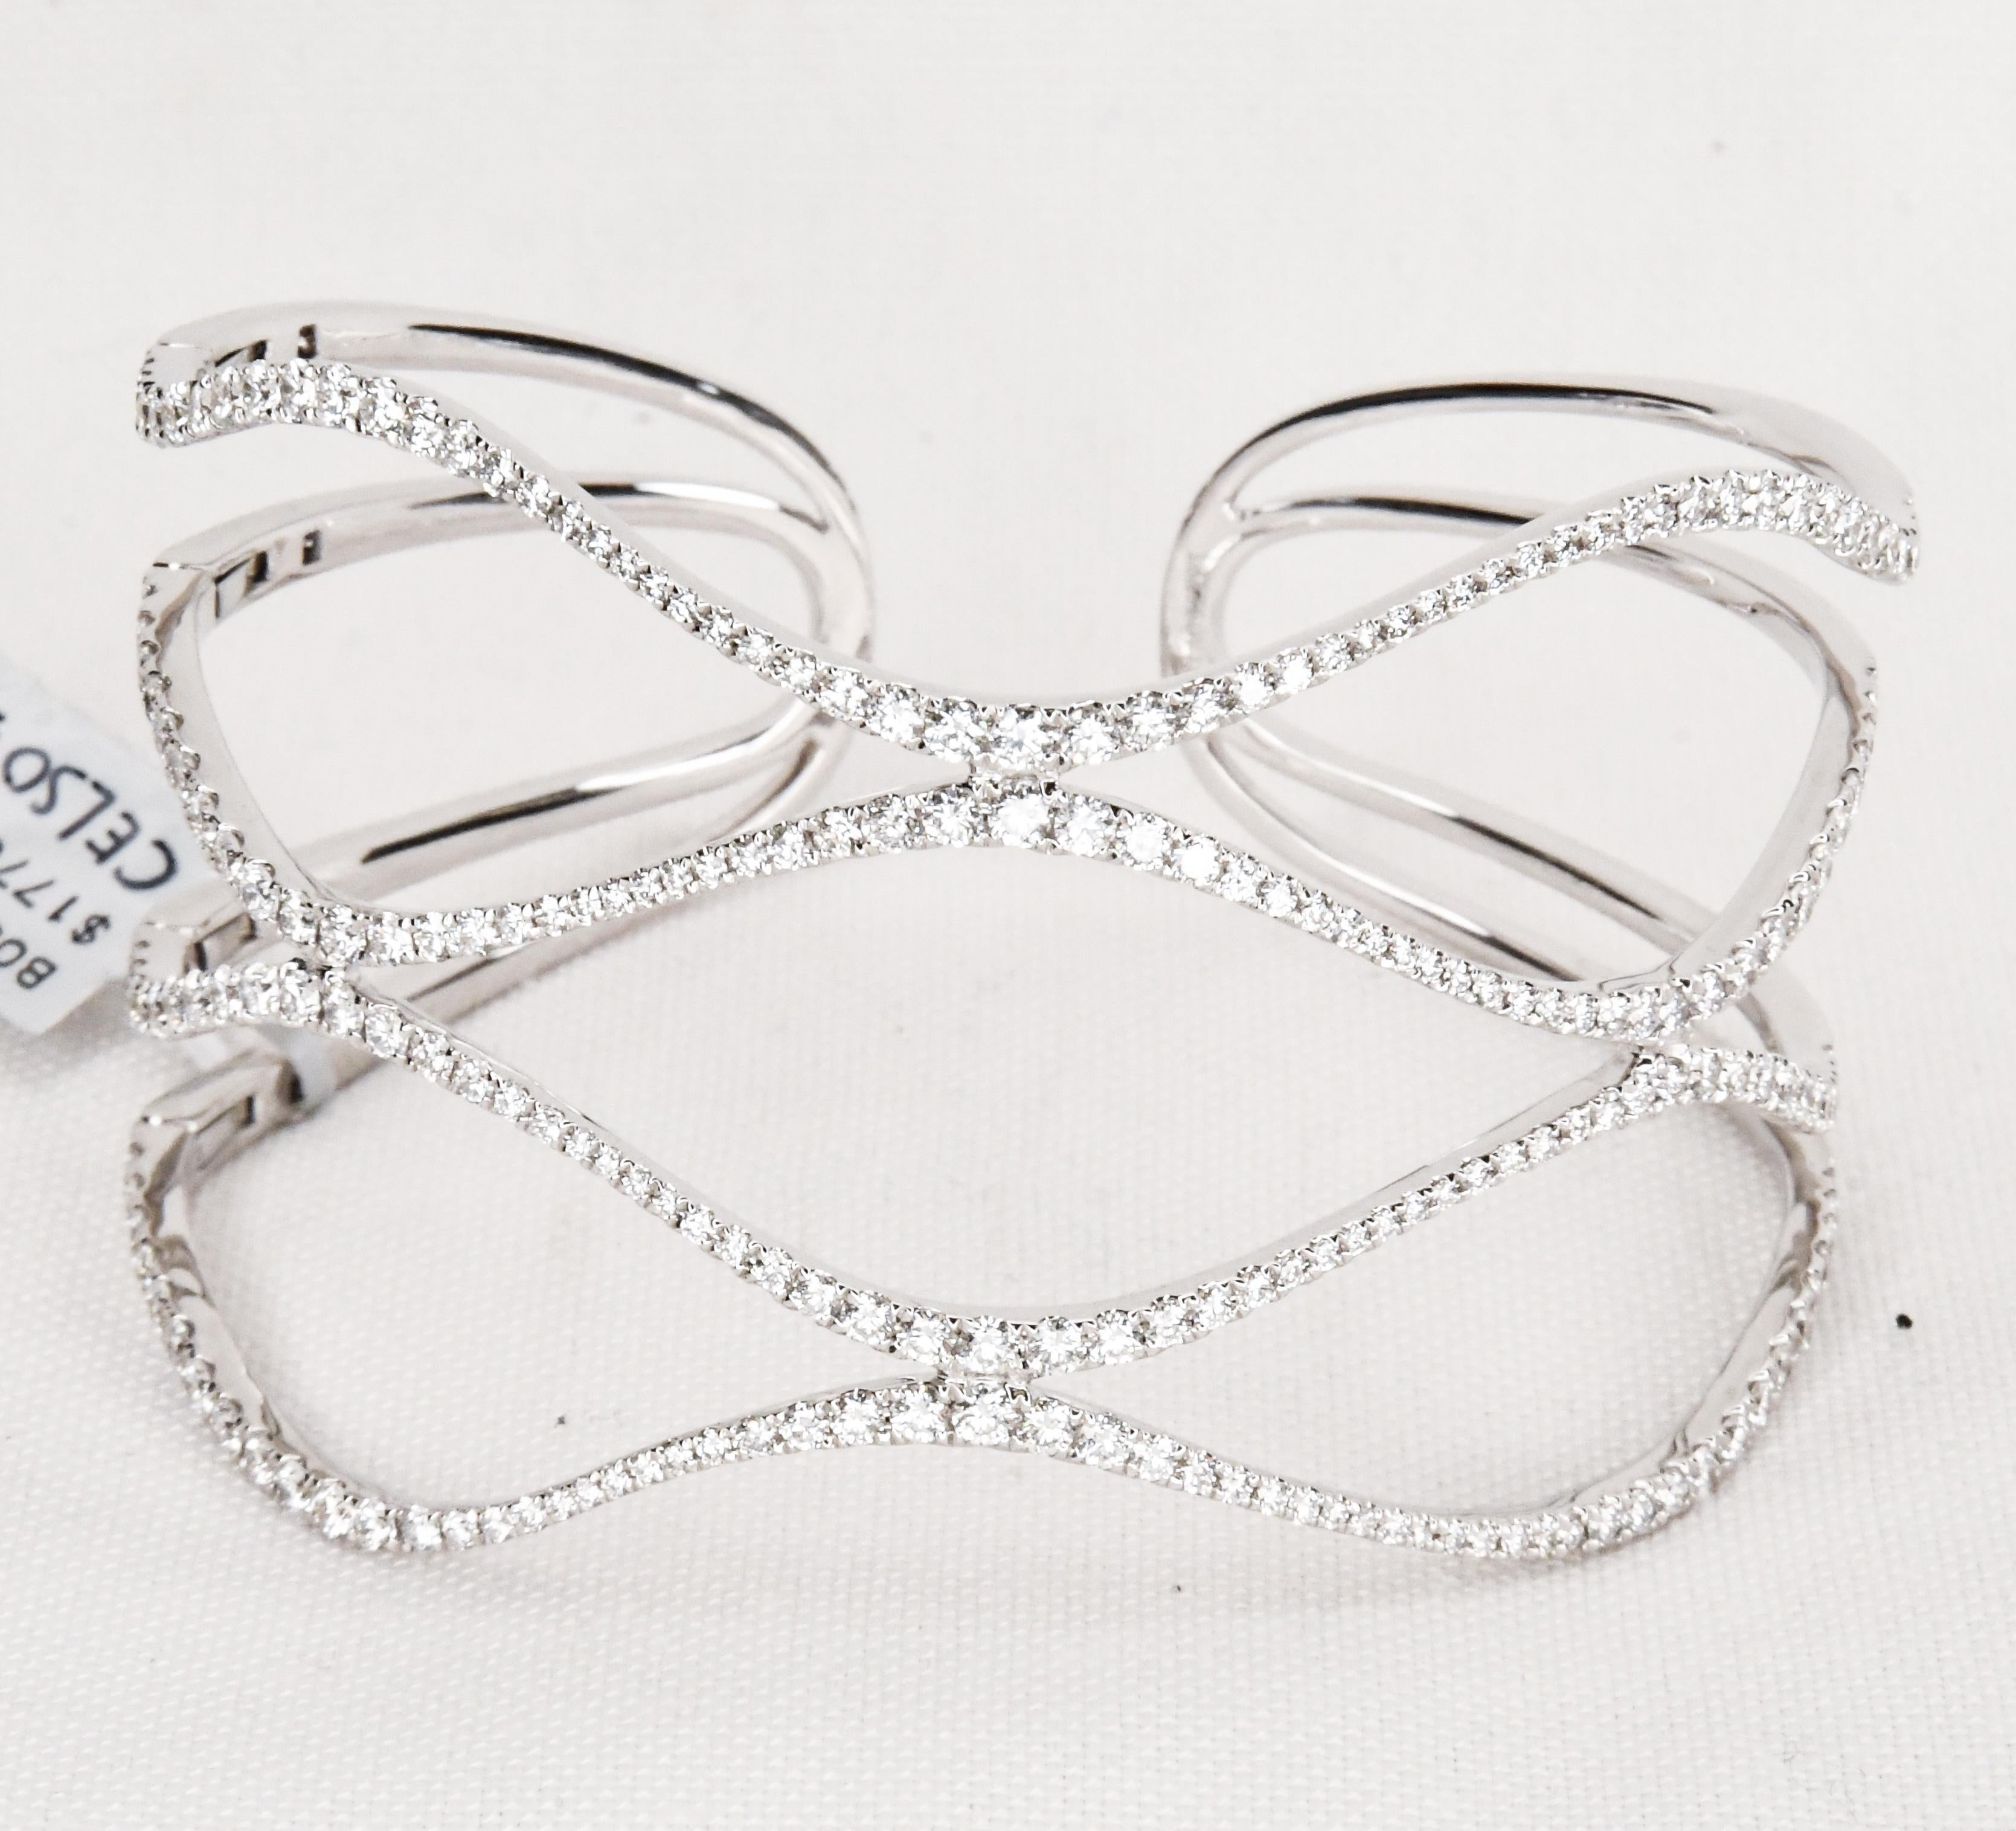 Artfully crafted in 18 karat white gold, this contemporary diamond pave hinged on one side open end cuff bracelet is stunning! Hinge on one side makes taking off and putting on a breeze!  Using 224 fully faceted perfectly matched diamonds having G-H